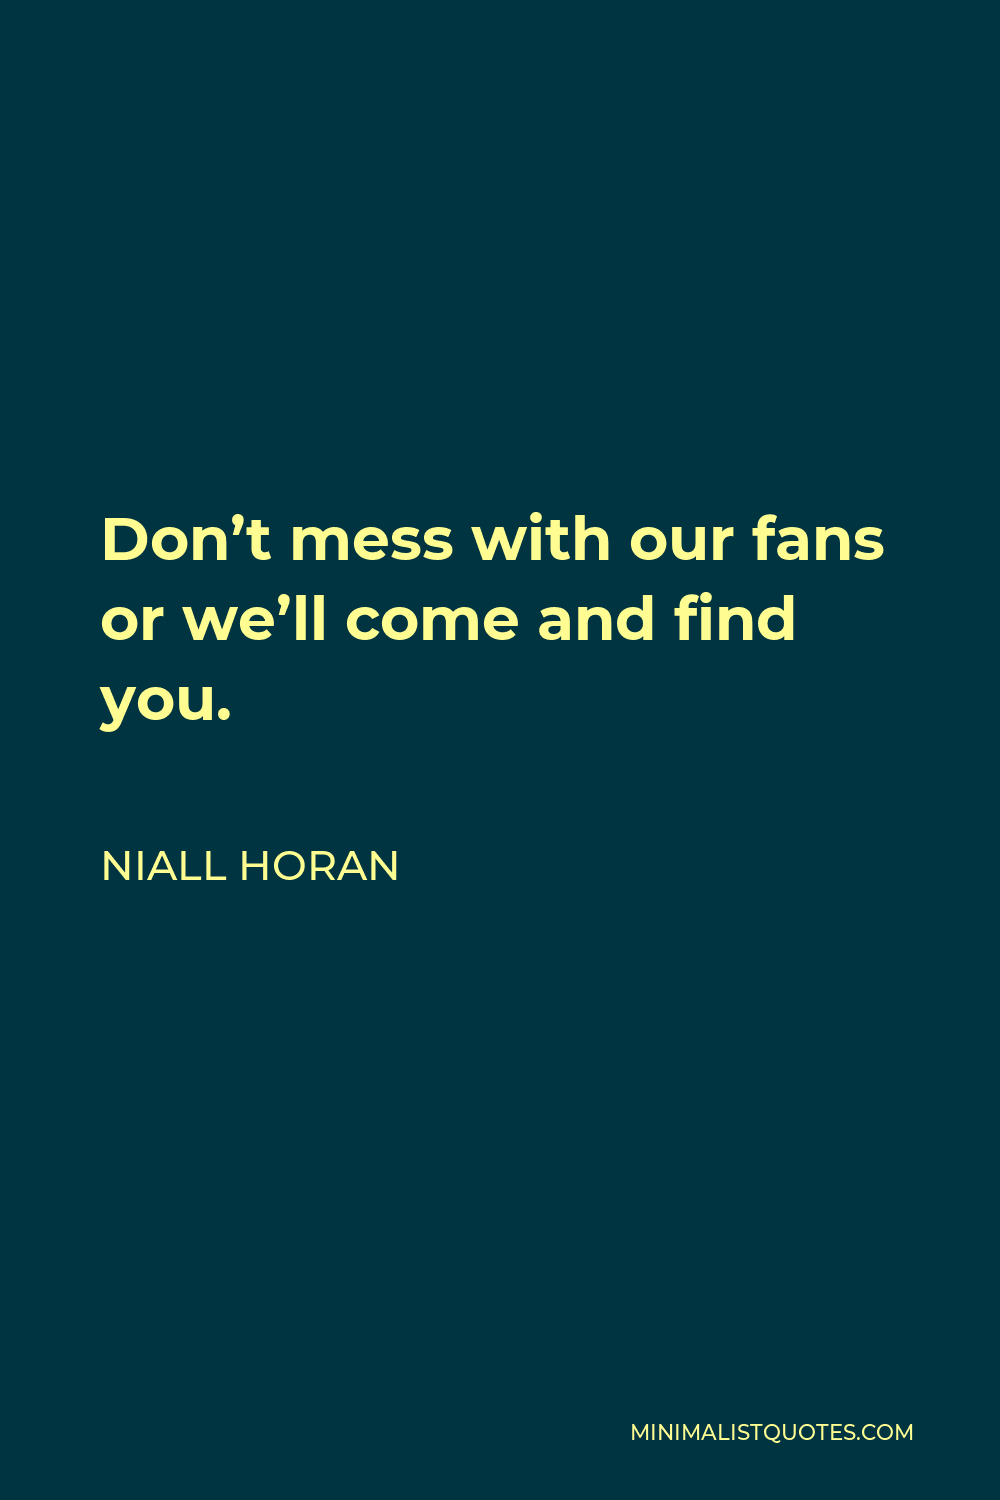 Niall Horan Quote - Don’t mess with our fans or we’ll come and find you.